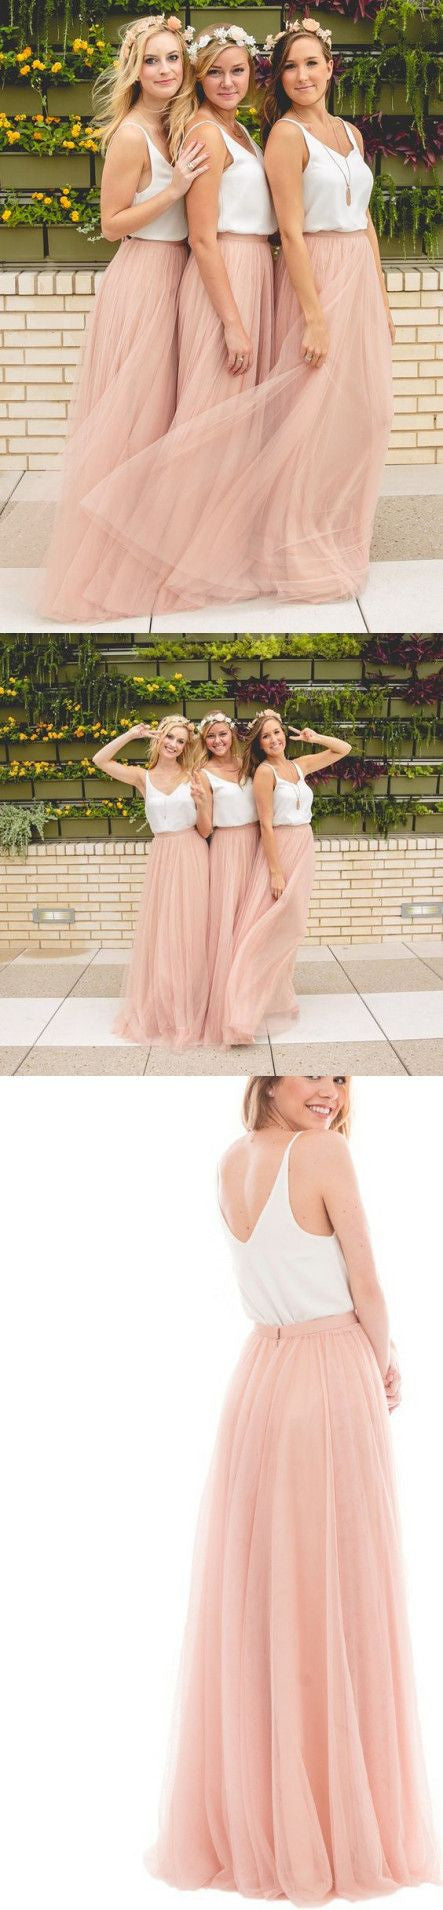 Dusty Pink Boho Bridesmaid Dresses,Rustic Bridesmaid Dresses,Tulle Skirt Bridesmaid Dresses,Fs015-Dolly Gown